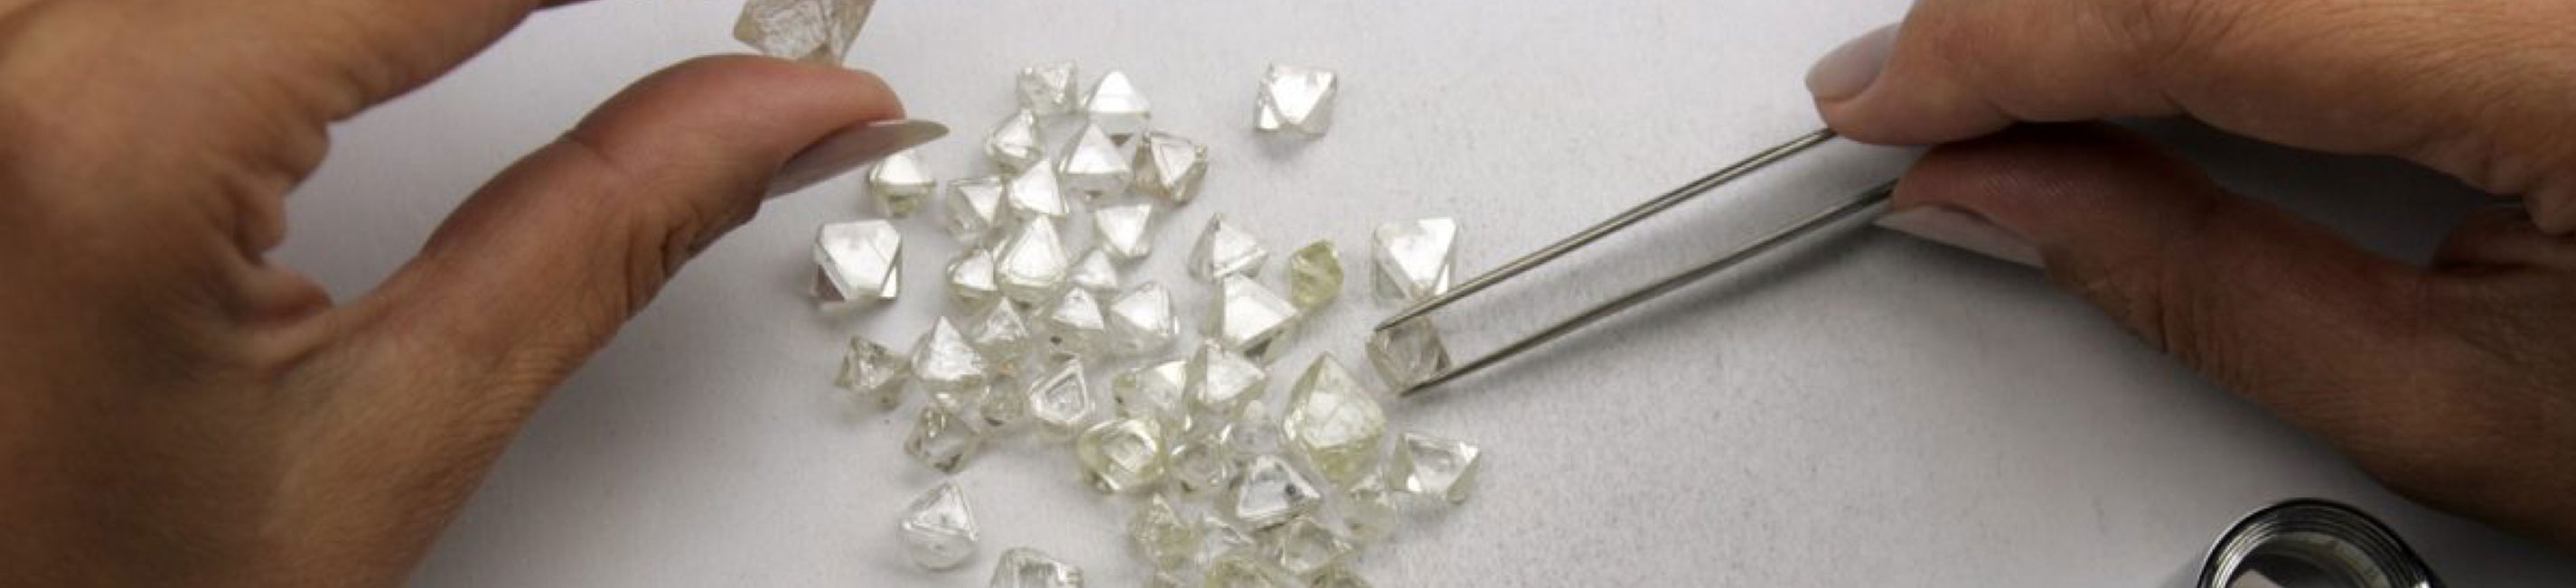 Rough diamonds being inspected.